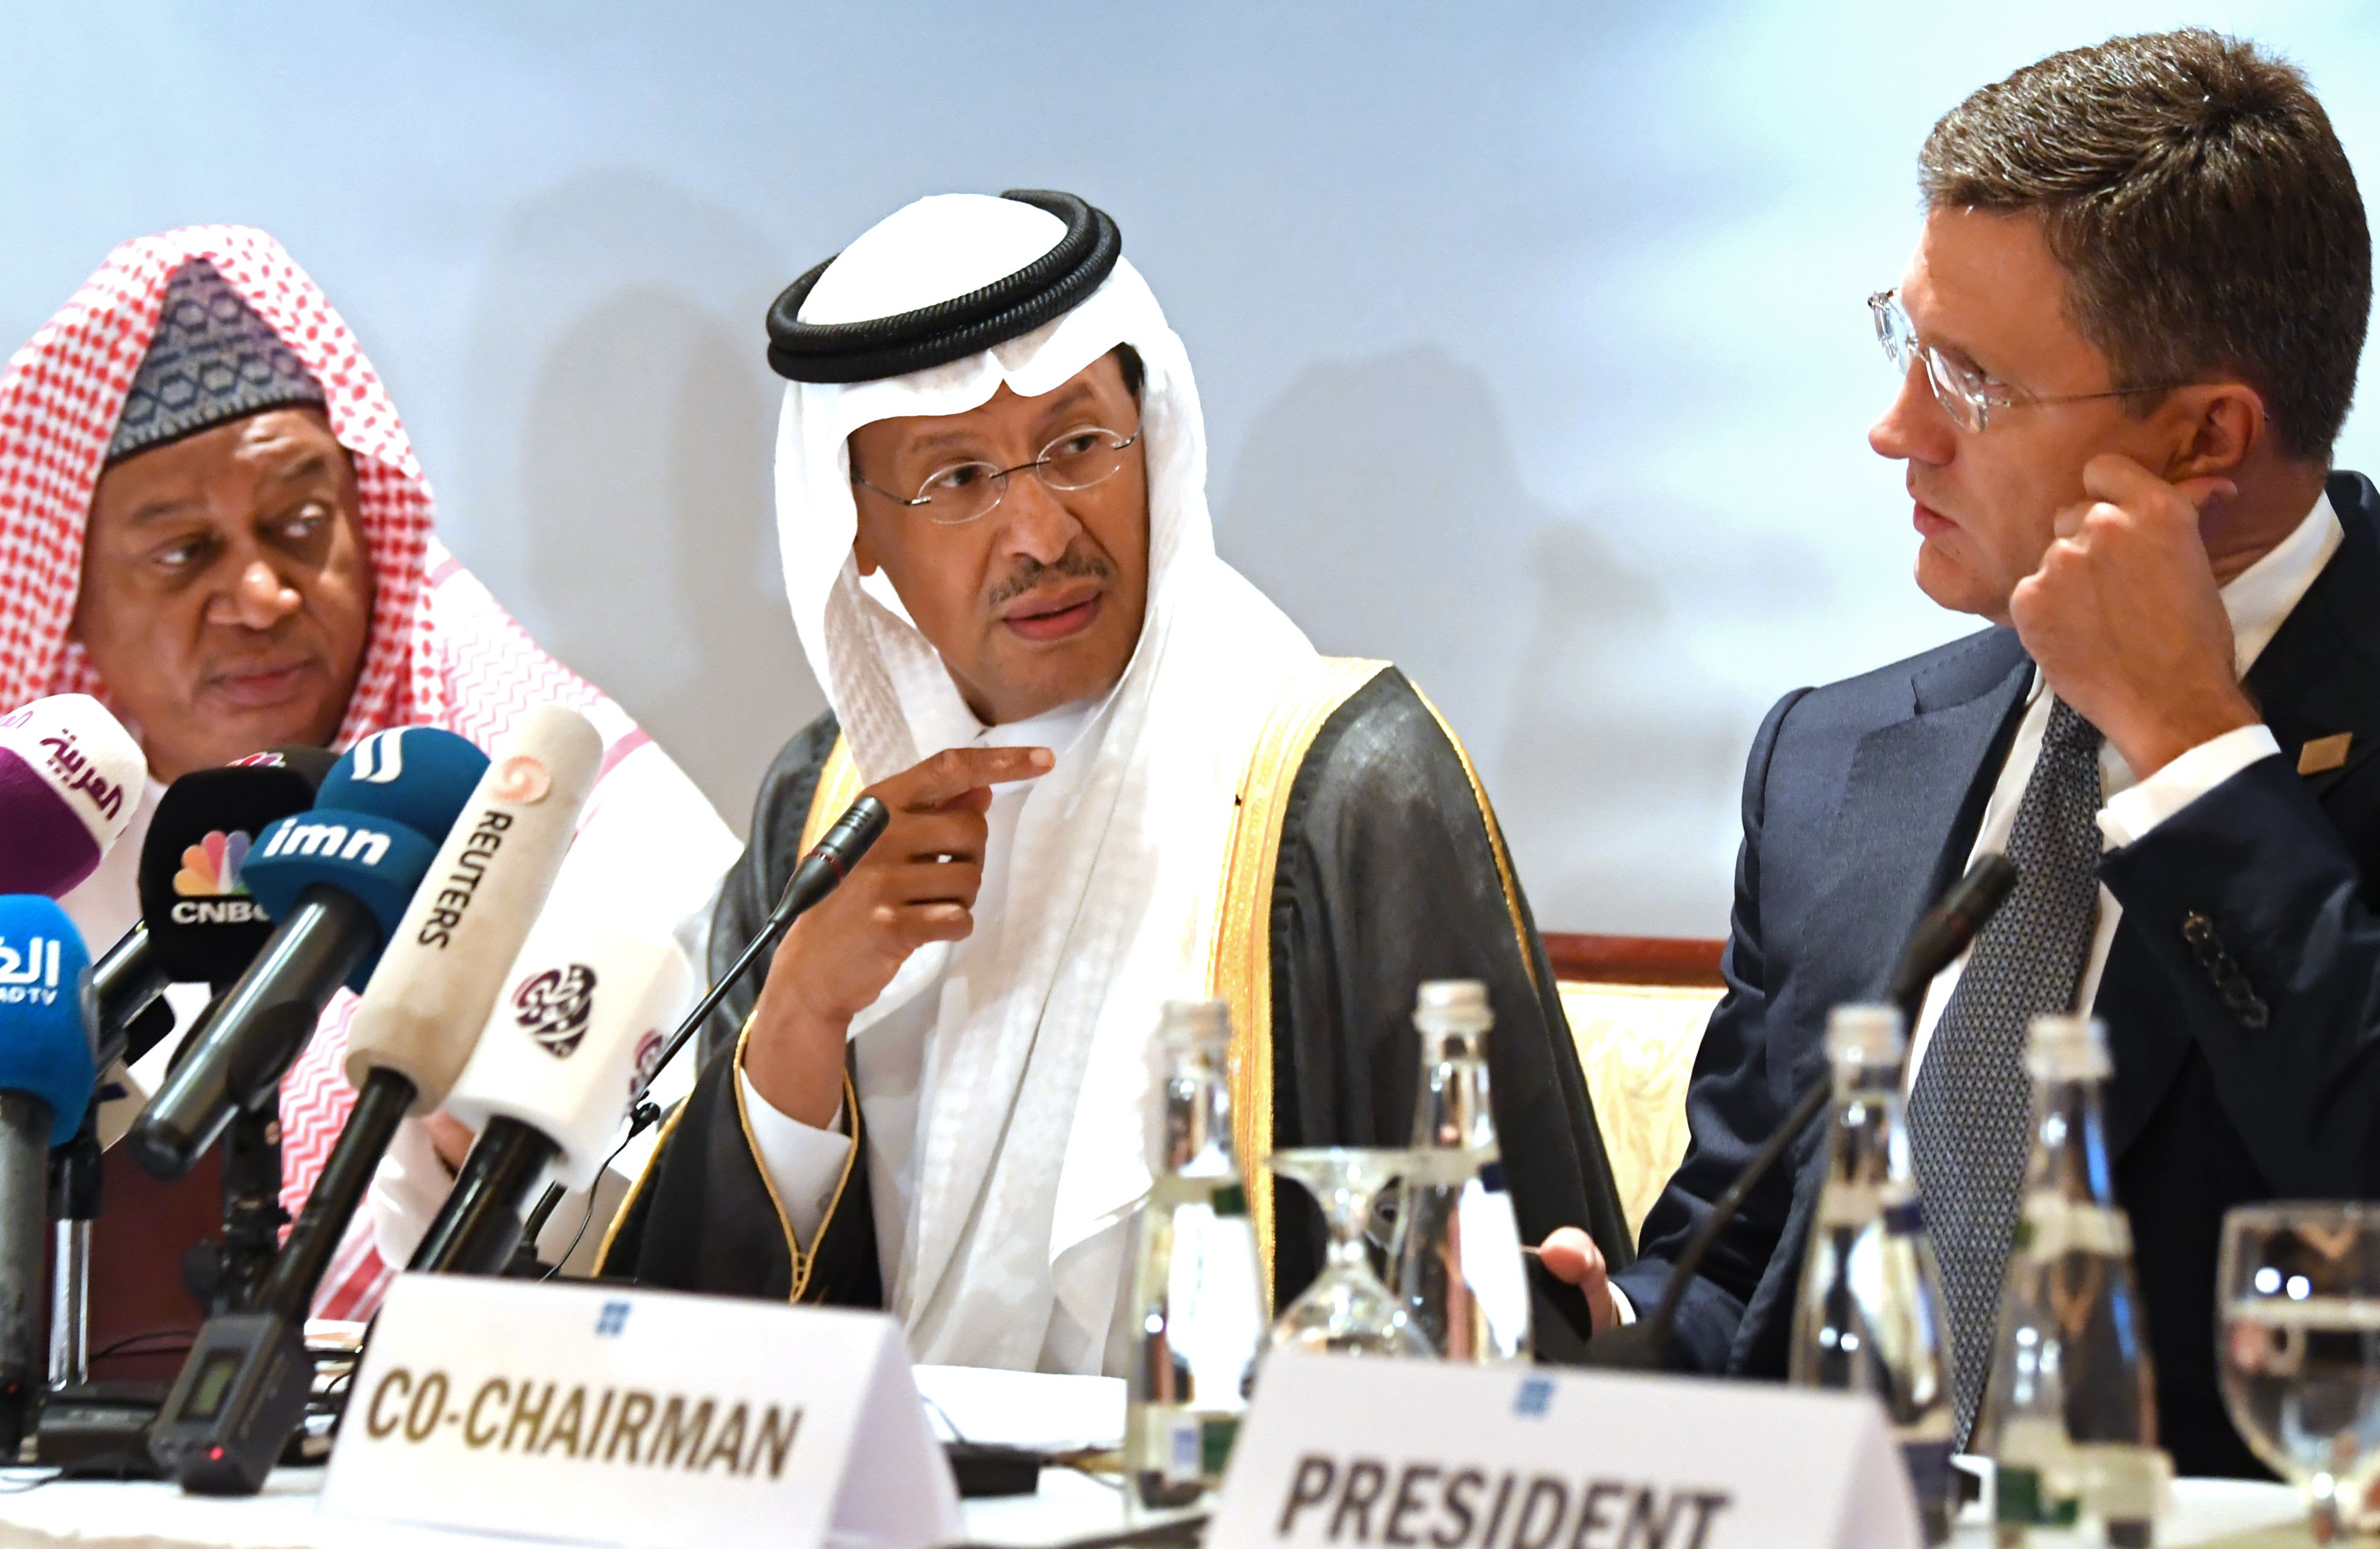 OPEC deal collapse sparks price war: $20 oil in 2020 is coming